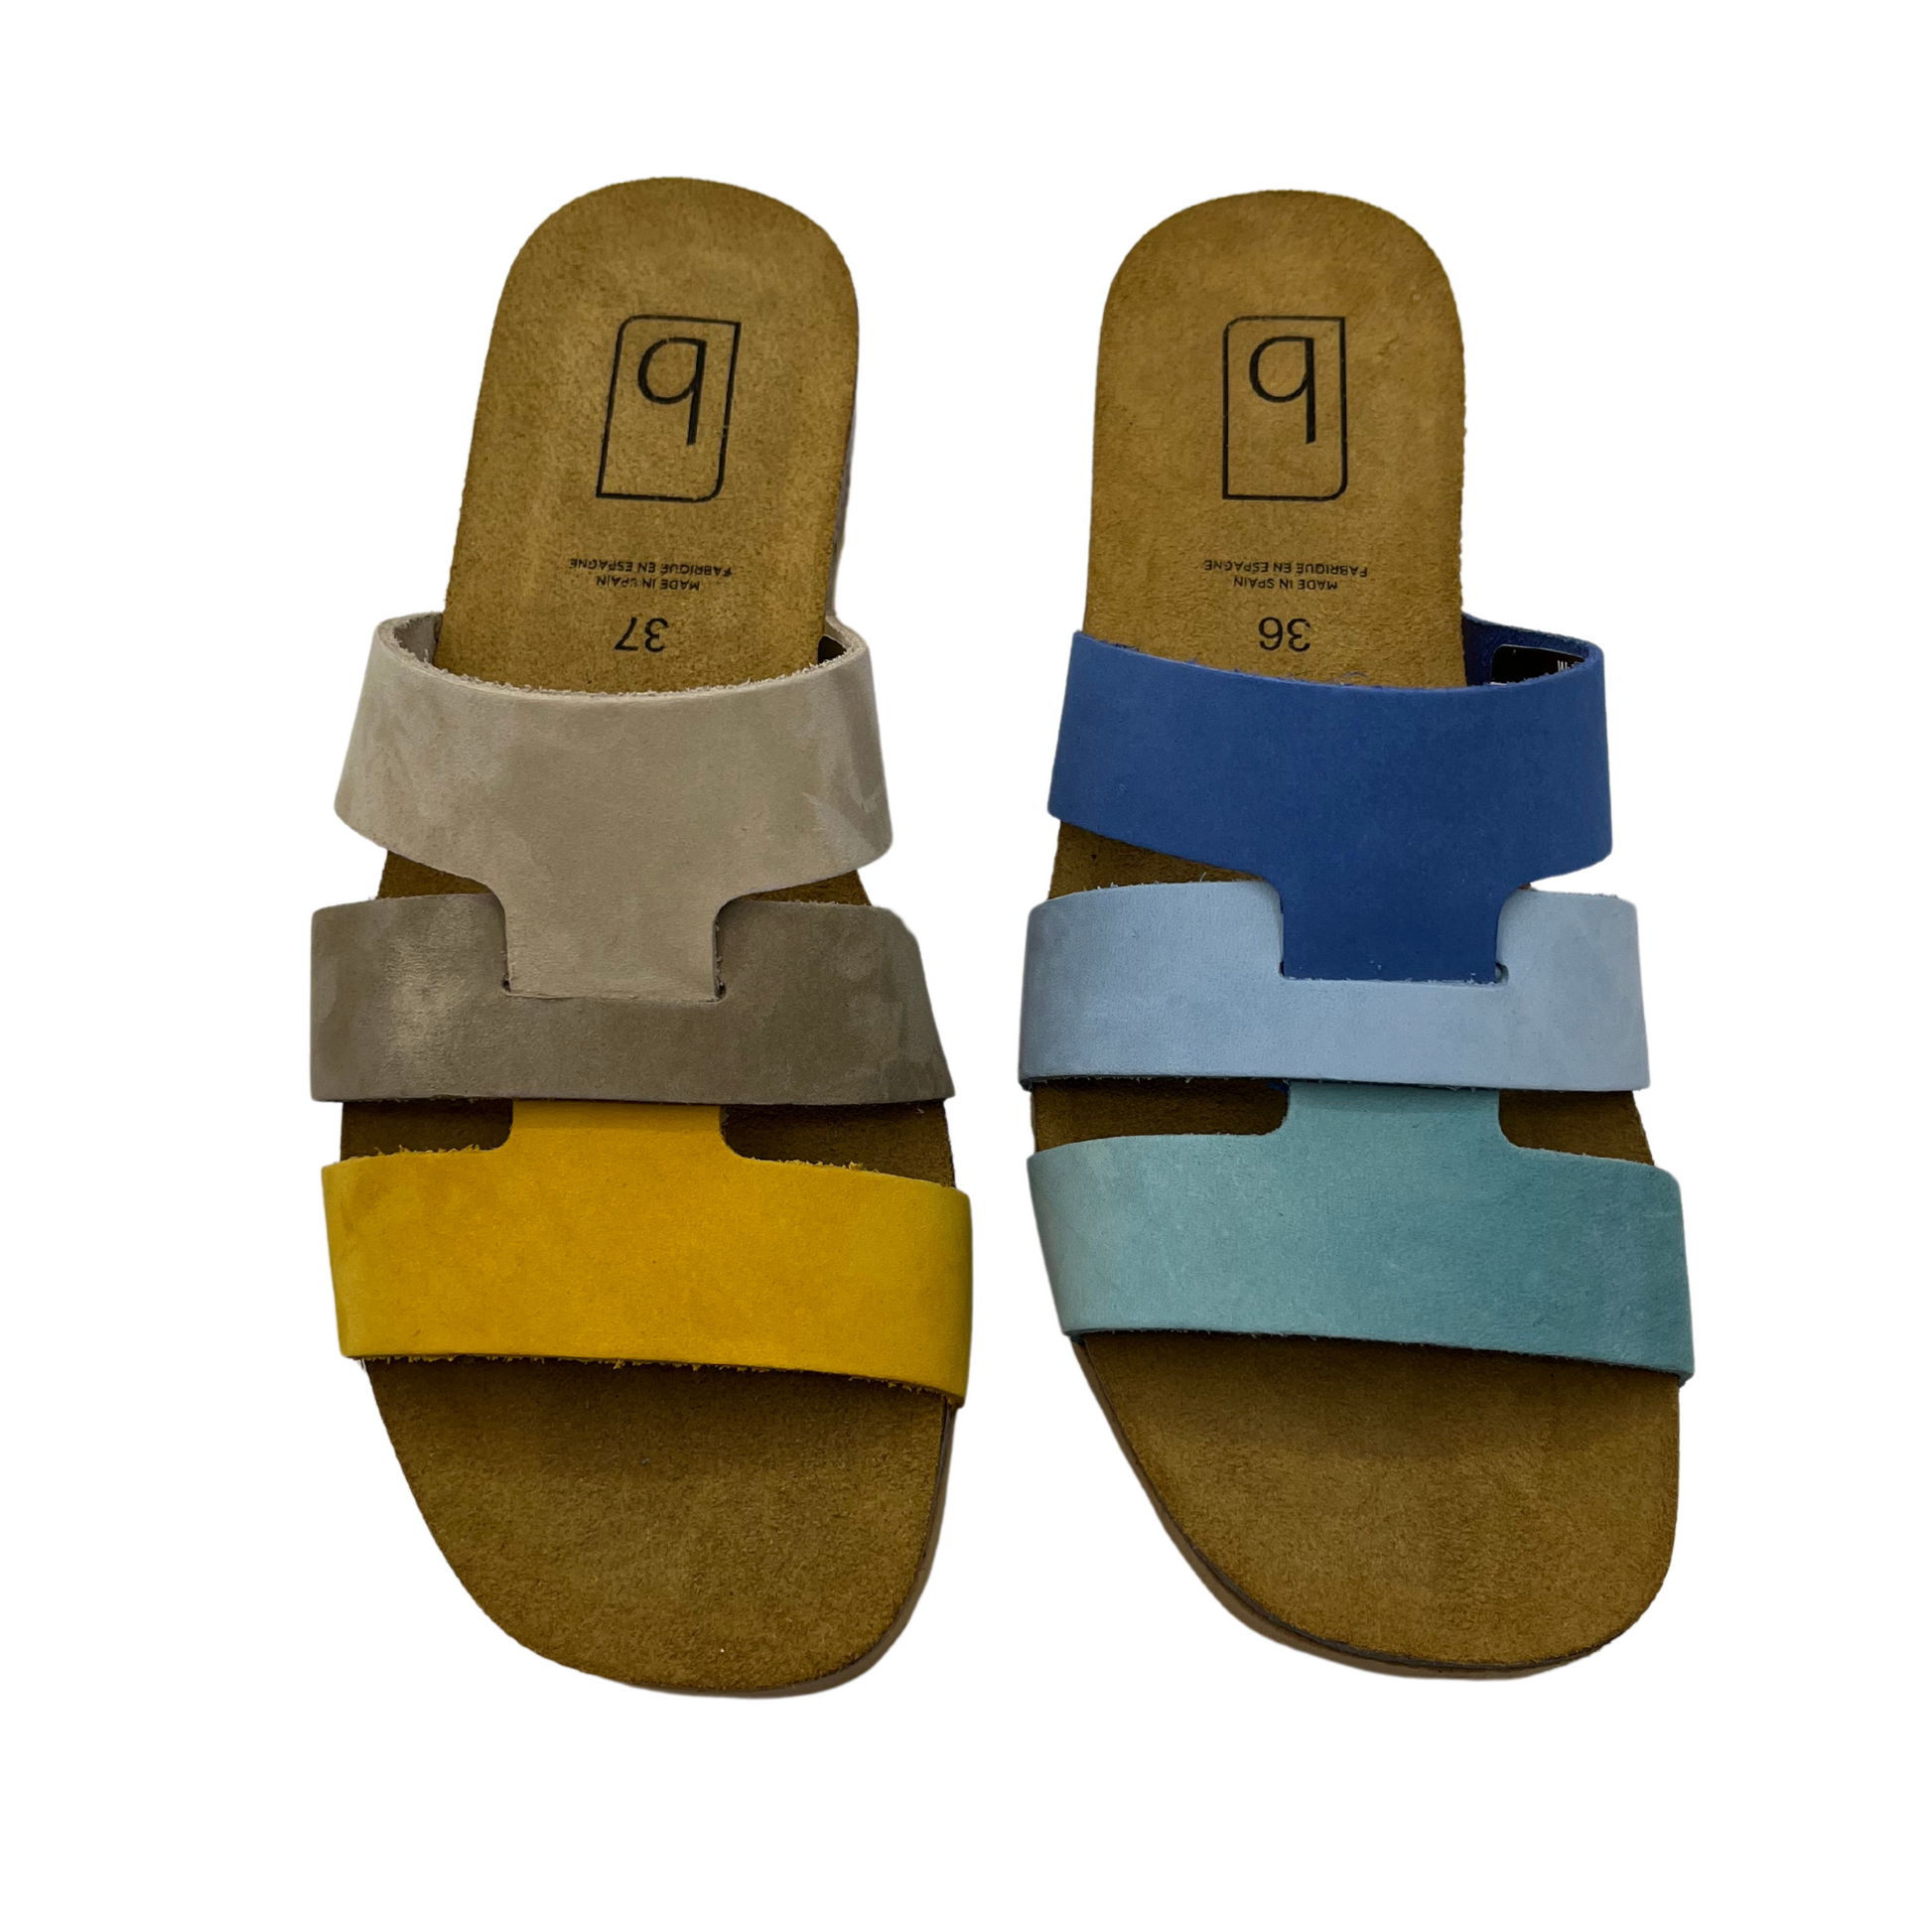 Top view of two suede slip on sandals. One is beige and yellow and the other one is 3 shades of blue. Tan suede lined with a rounded toe